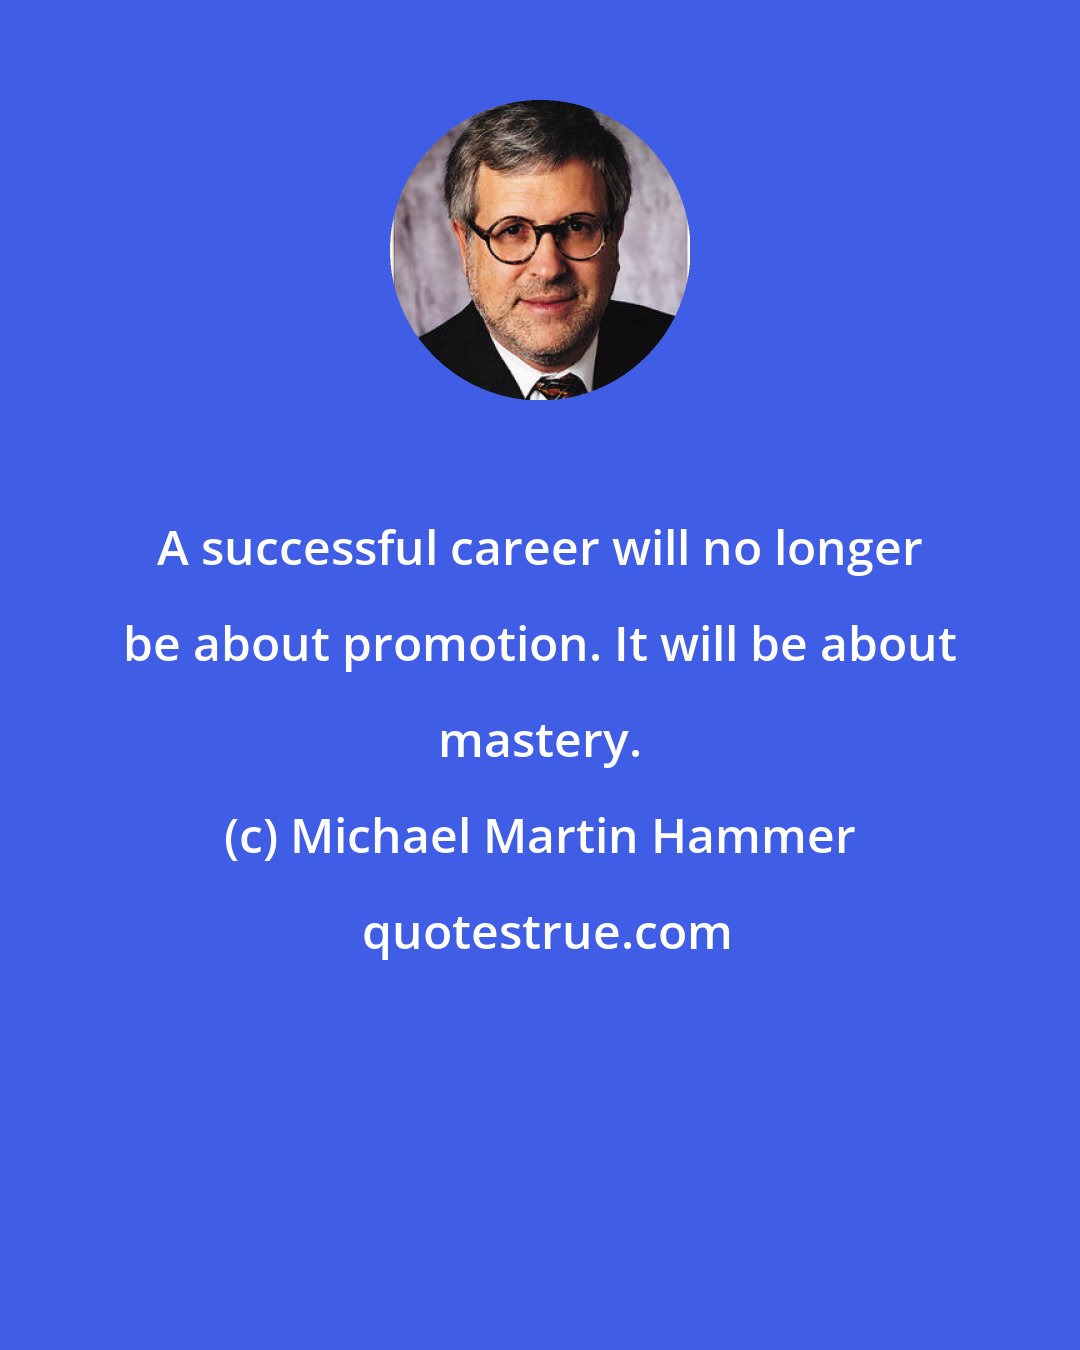 Michael Martin Hammer: A successful career will no longer be about promotion. It will be about mastery.